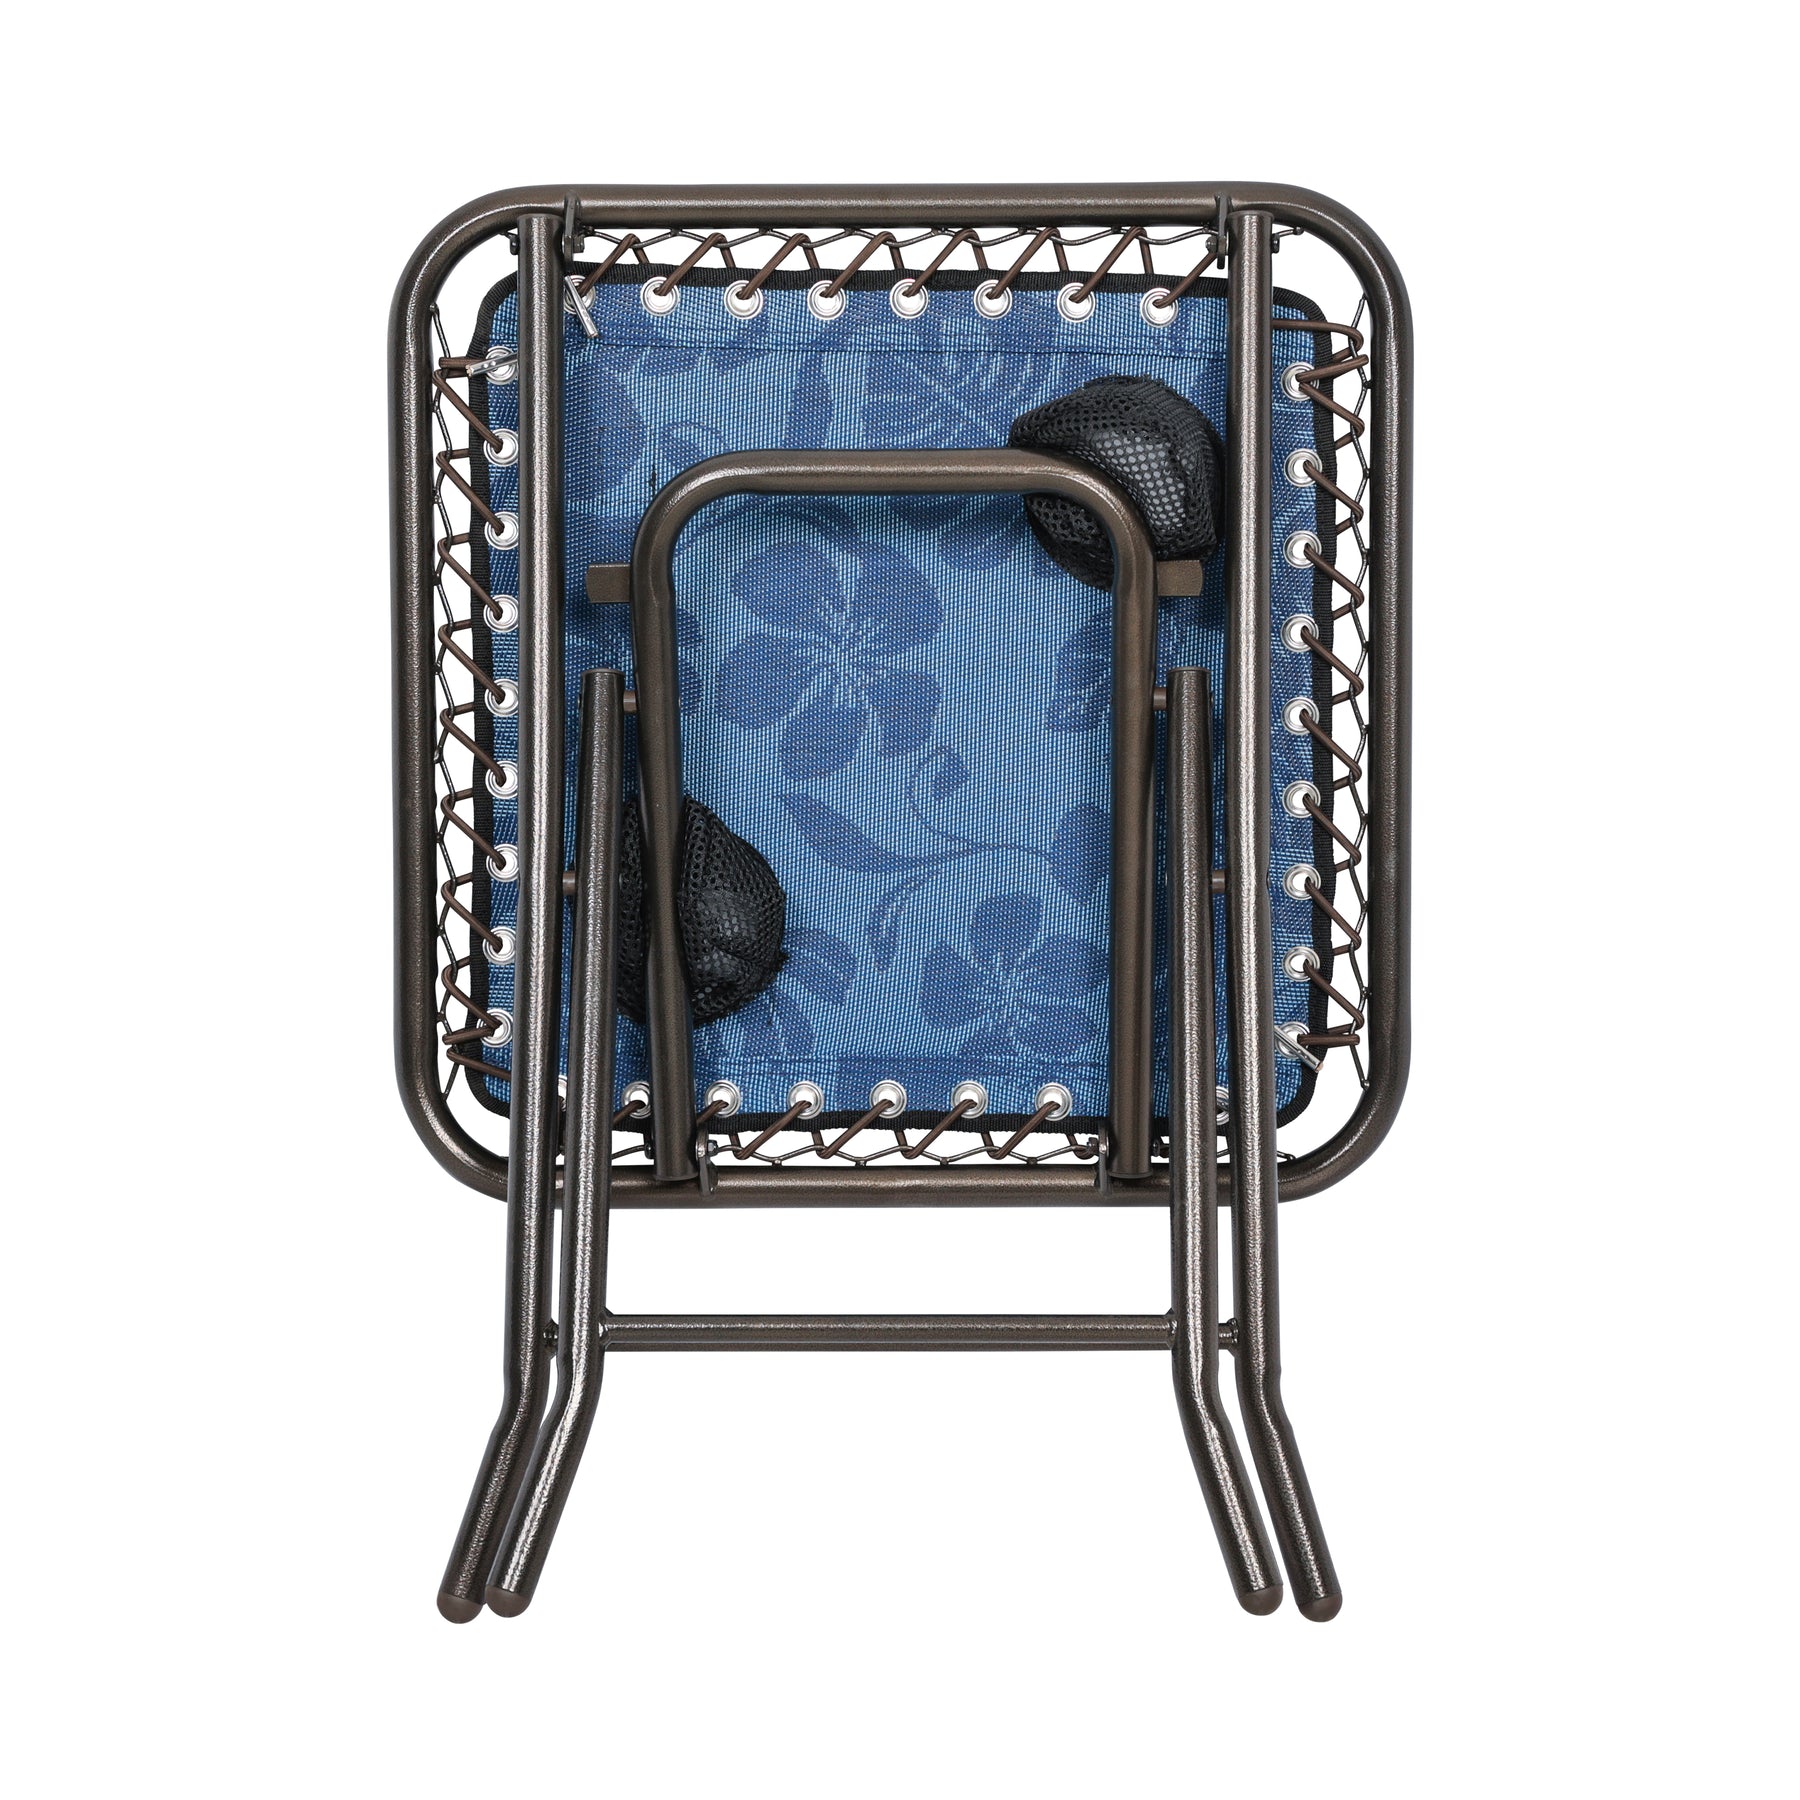 Folded Bliss Hammocks 20-inch Folding Side Table with 2 Built-In Cup Holders in the blue flowers variation.